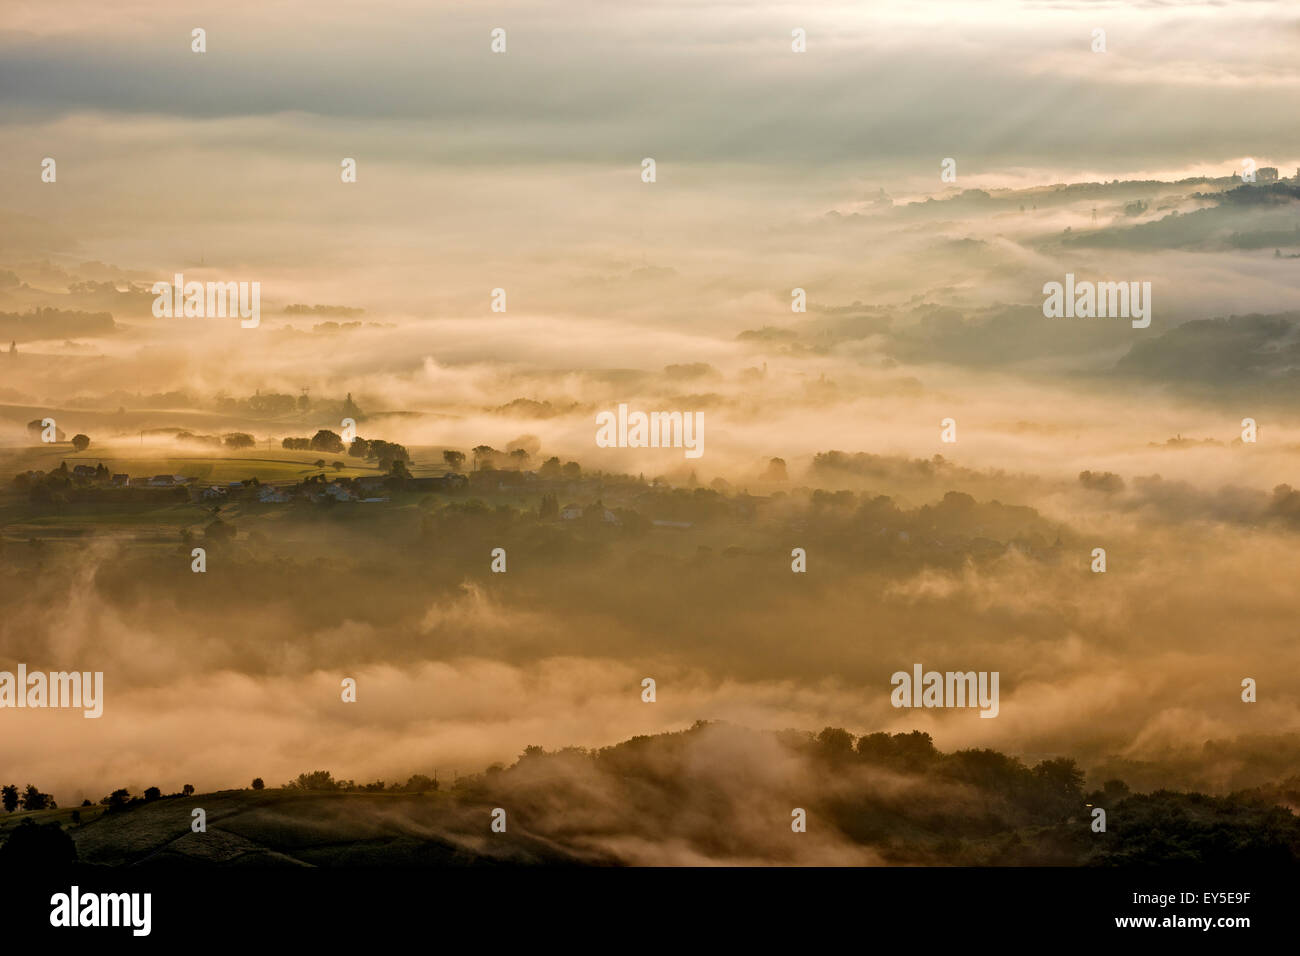 Mists of Savoyard countryside at dawn - France after a stormy night Stock Photo